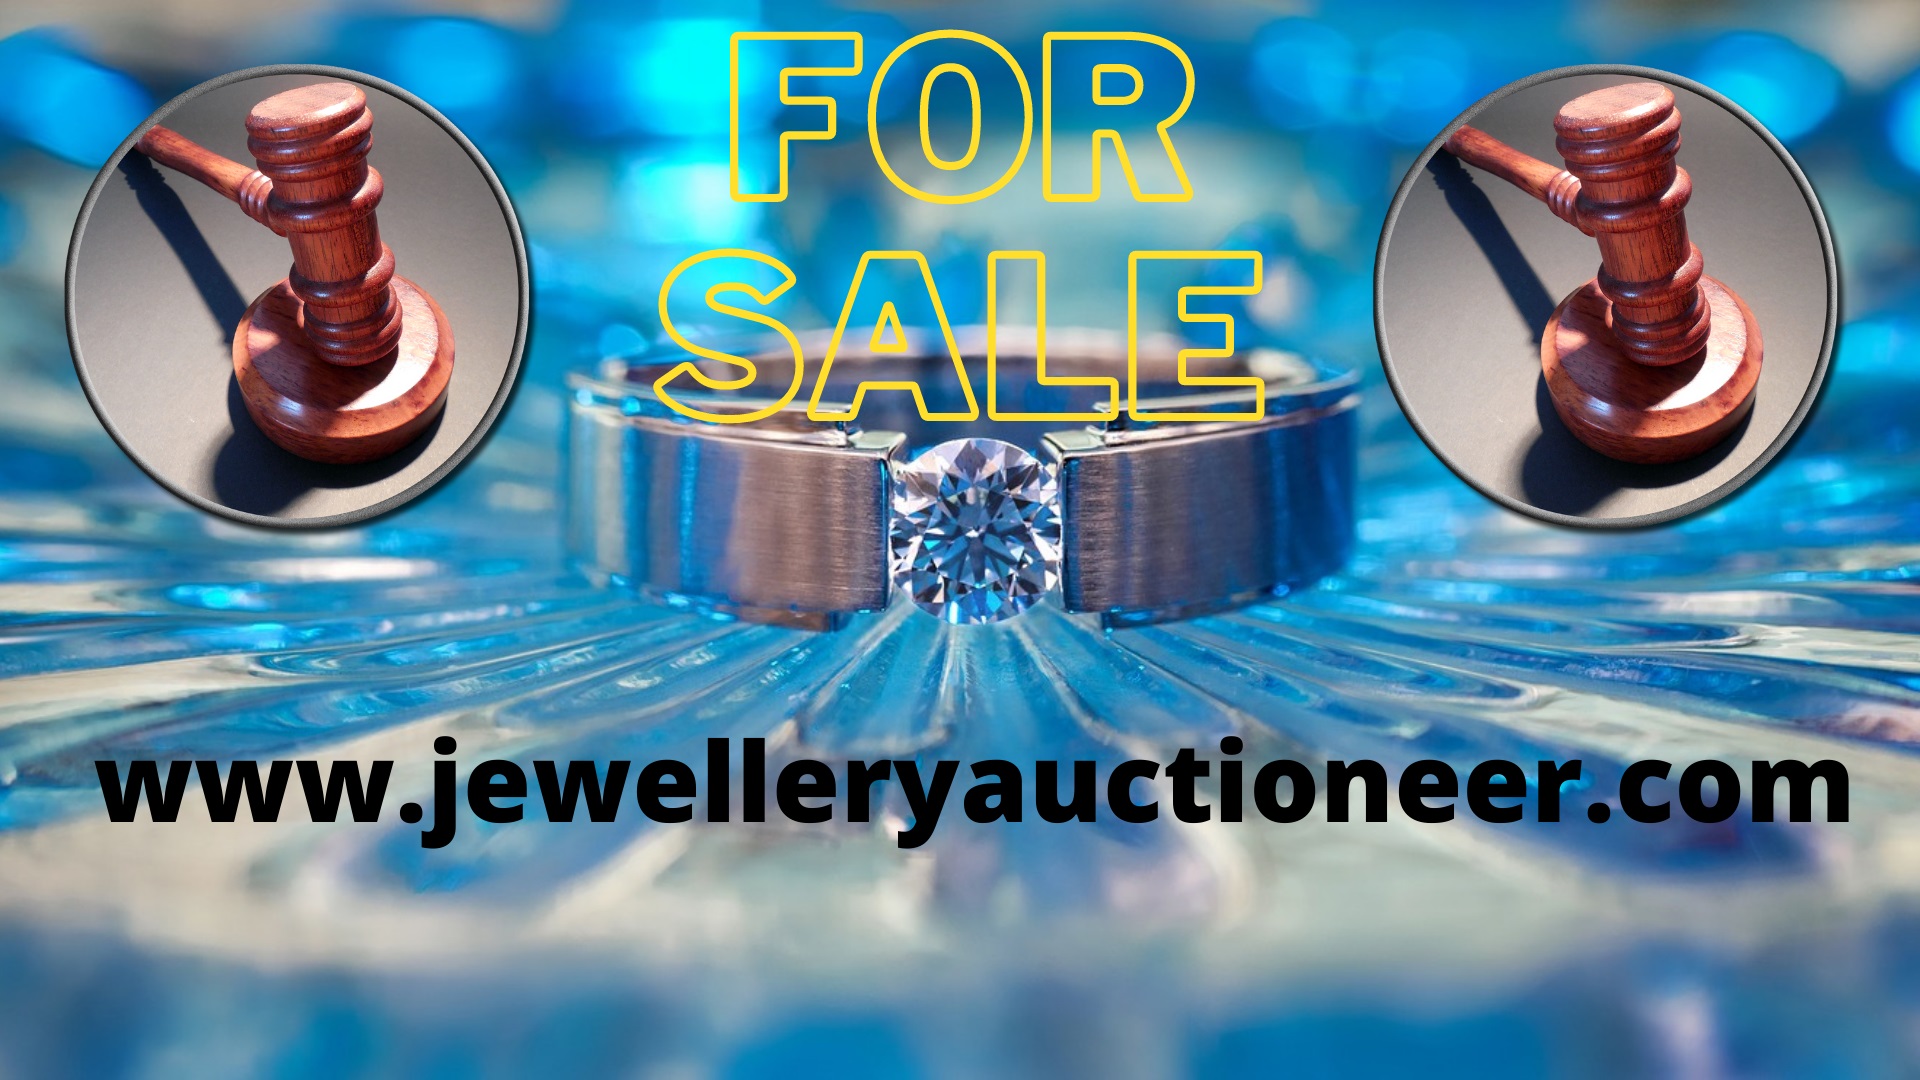 Big image of diamond ring and auctioneer's gavel advertising premium domain jewelleryactioneer.com is for sale now